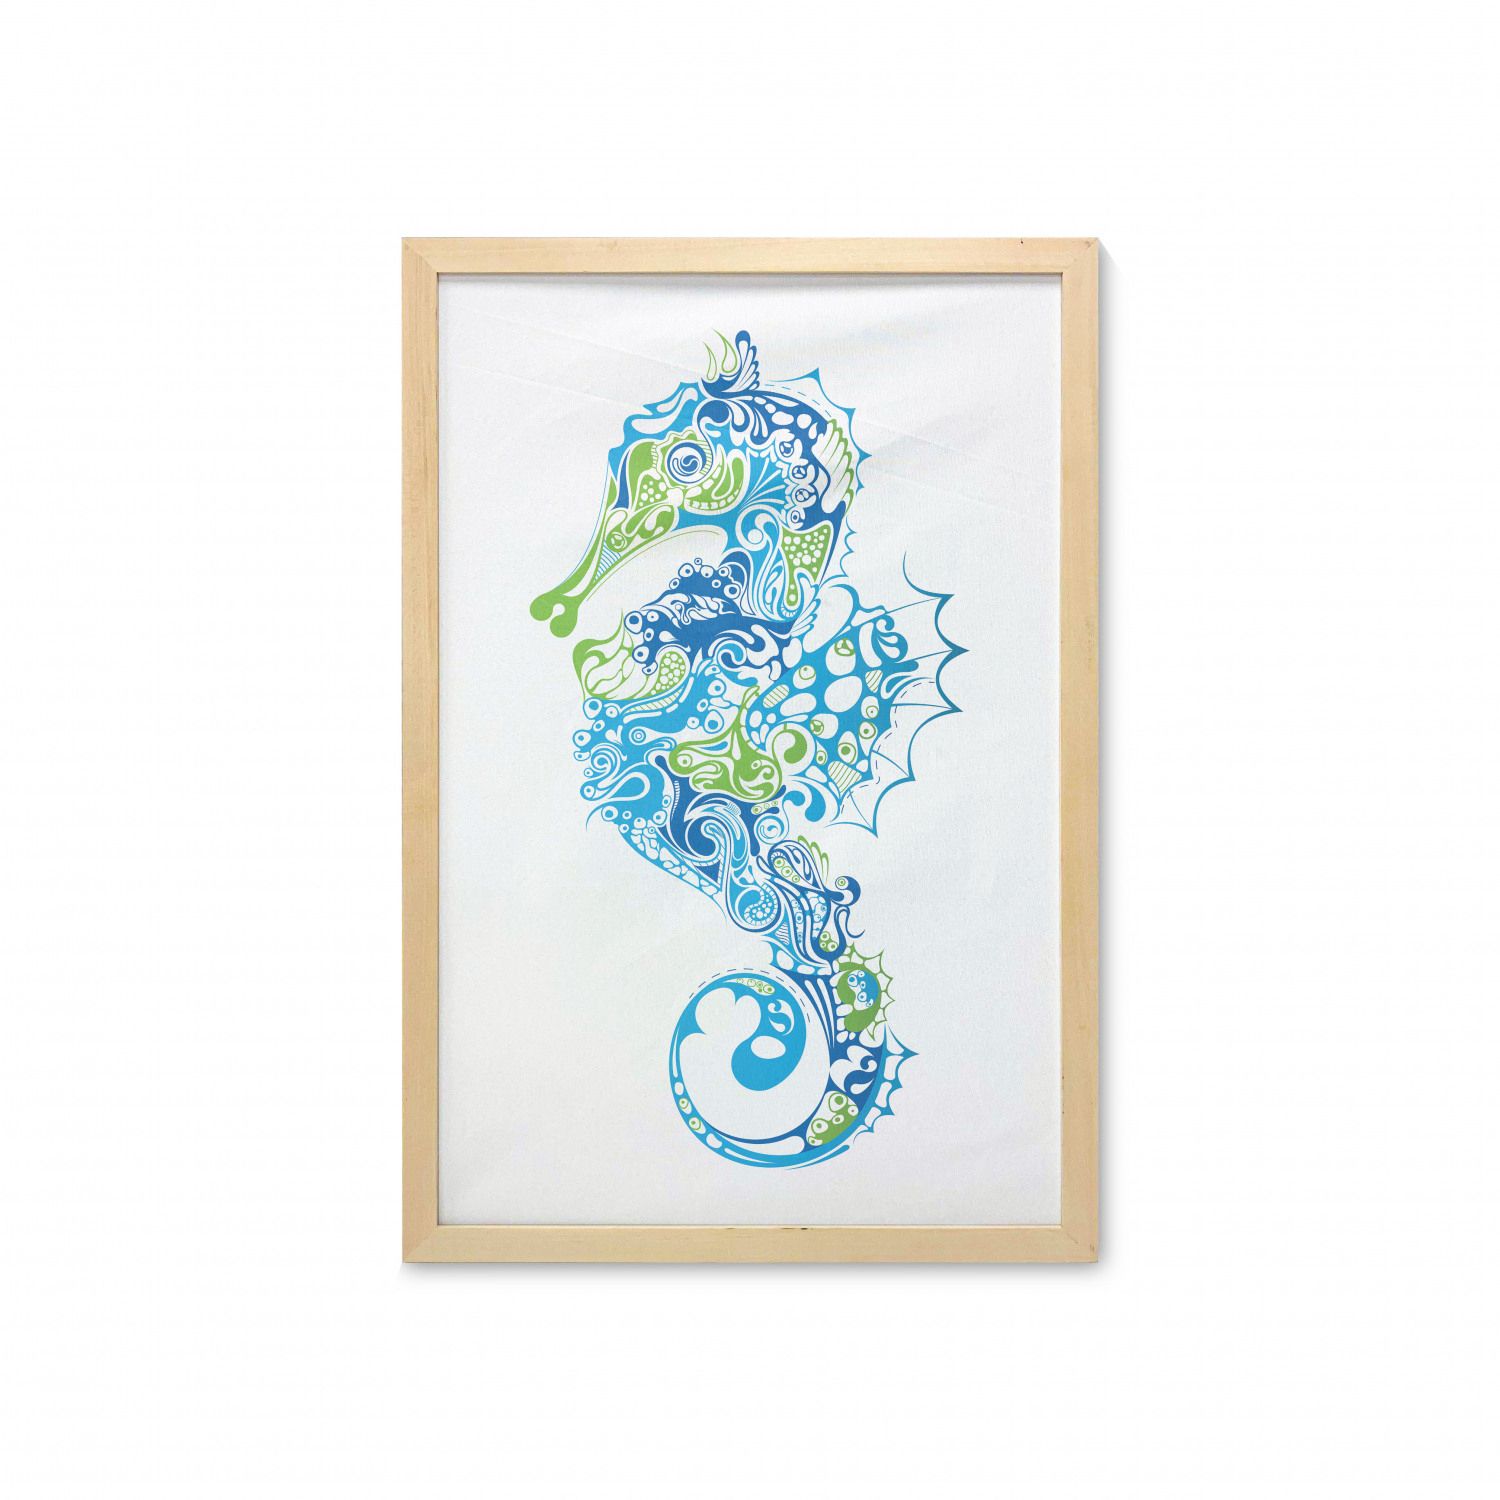 Seahorse Wall Art With Frame, Seahorse Design With Abstract Curvy And Wavy  Geometric Forms, Printed Fabric Poster For Bathroom Living Room Dorms, 23"  X 35", Lime Green Night Blue,ambesonne – With Regard To Current Seahorse Wall Art (Gallery 10 of 20)